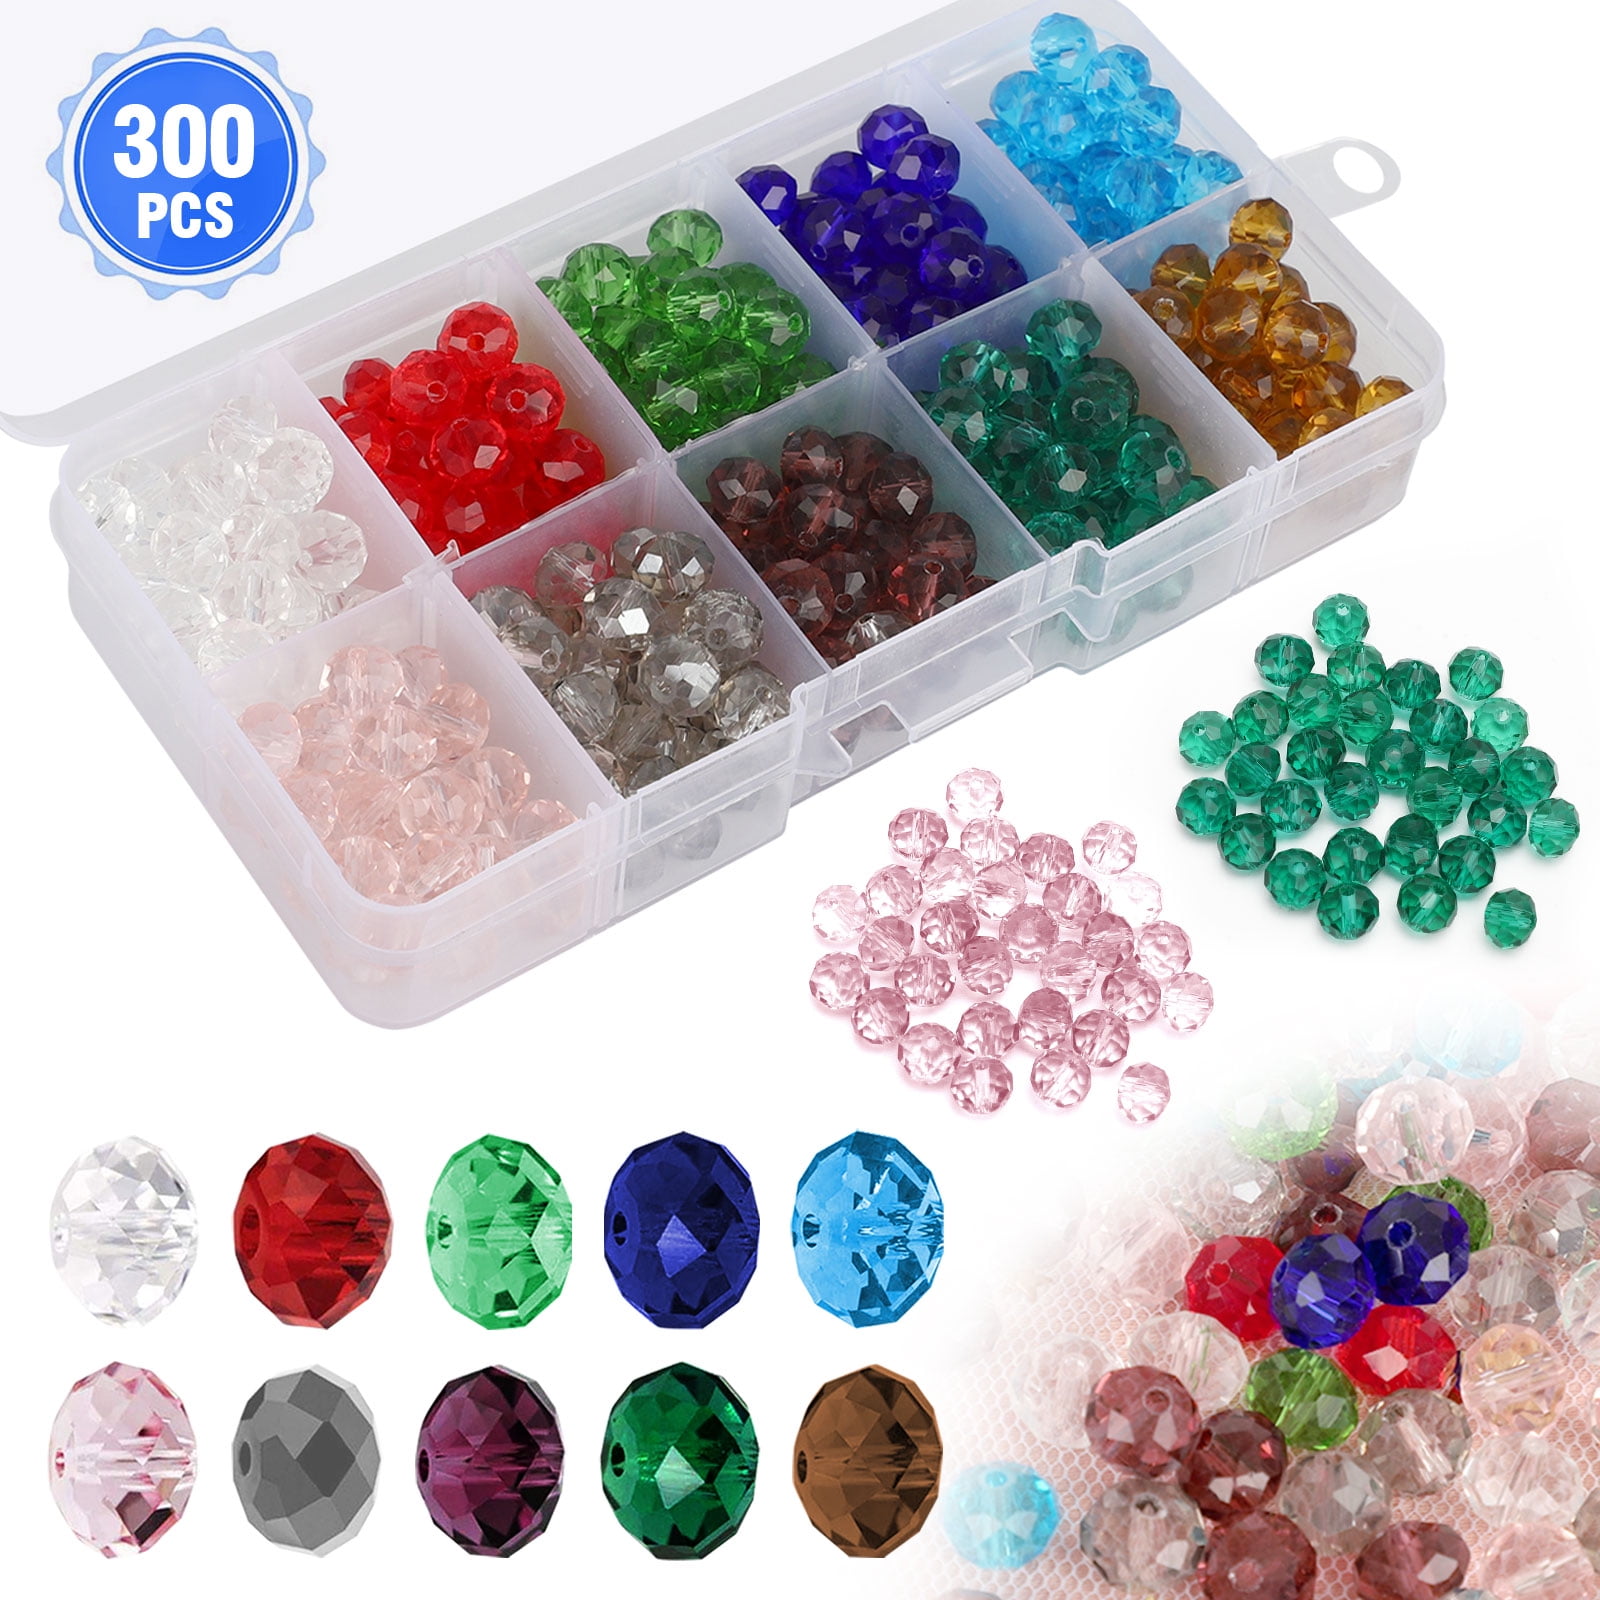 300Pcs 6mm Glass Crystal Faceted Rondelle Spacer Loose Beads DIY Jewelry Making#